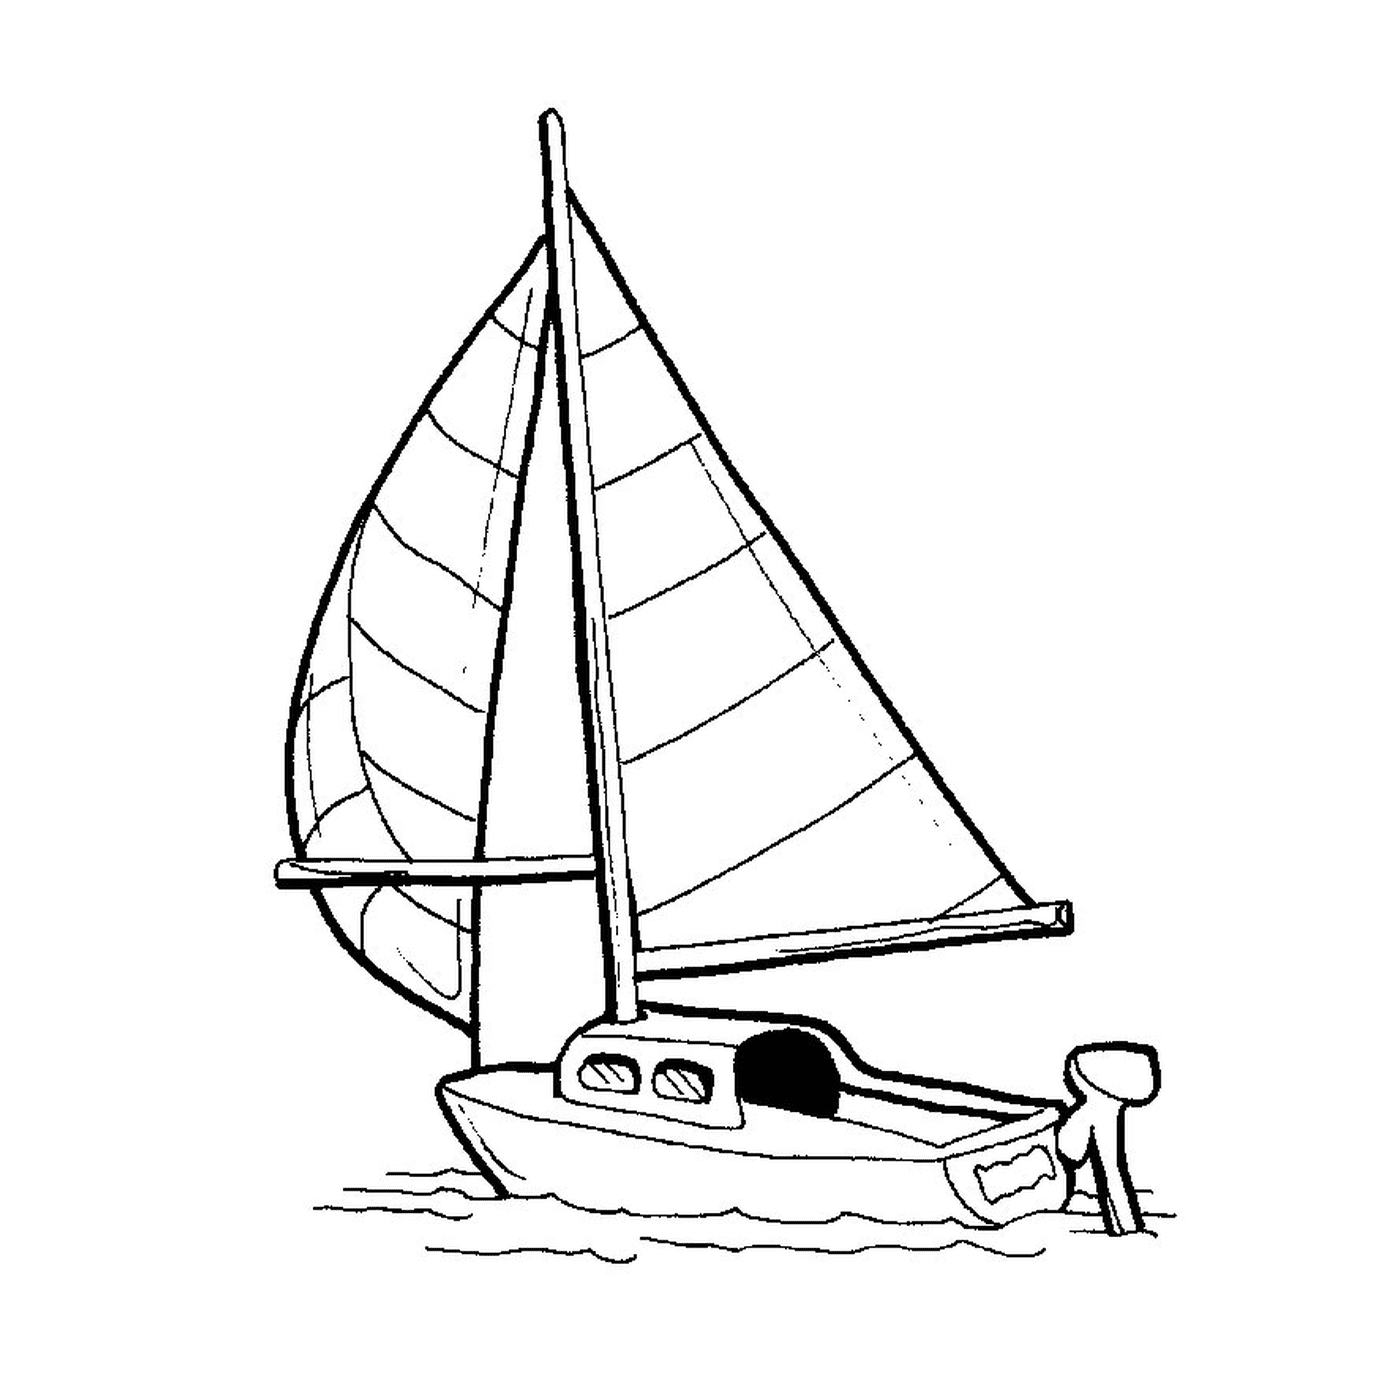  A racing boat is shown in a drawing 